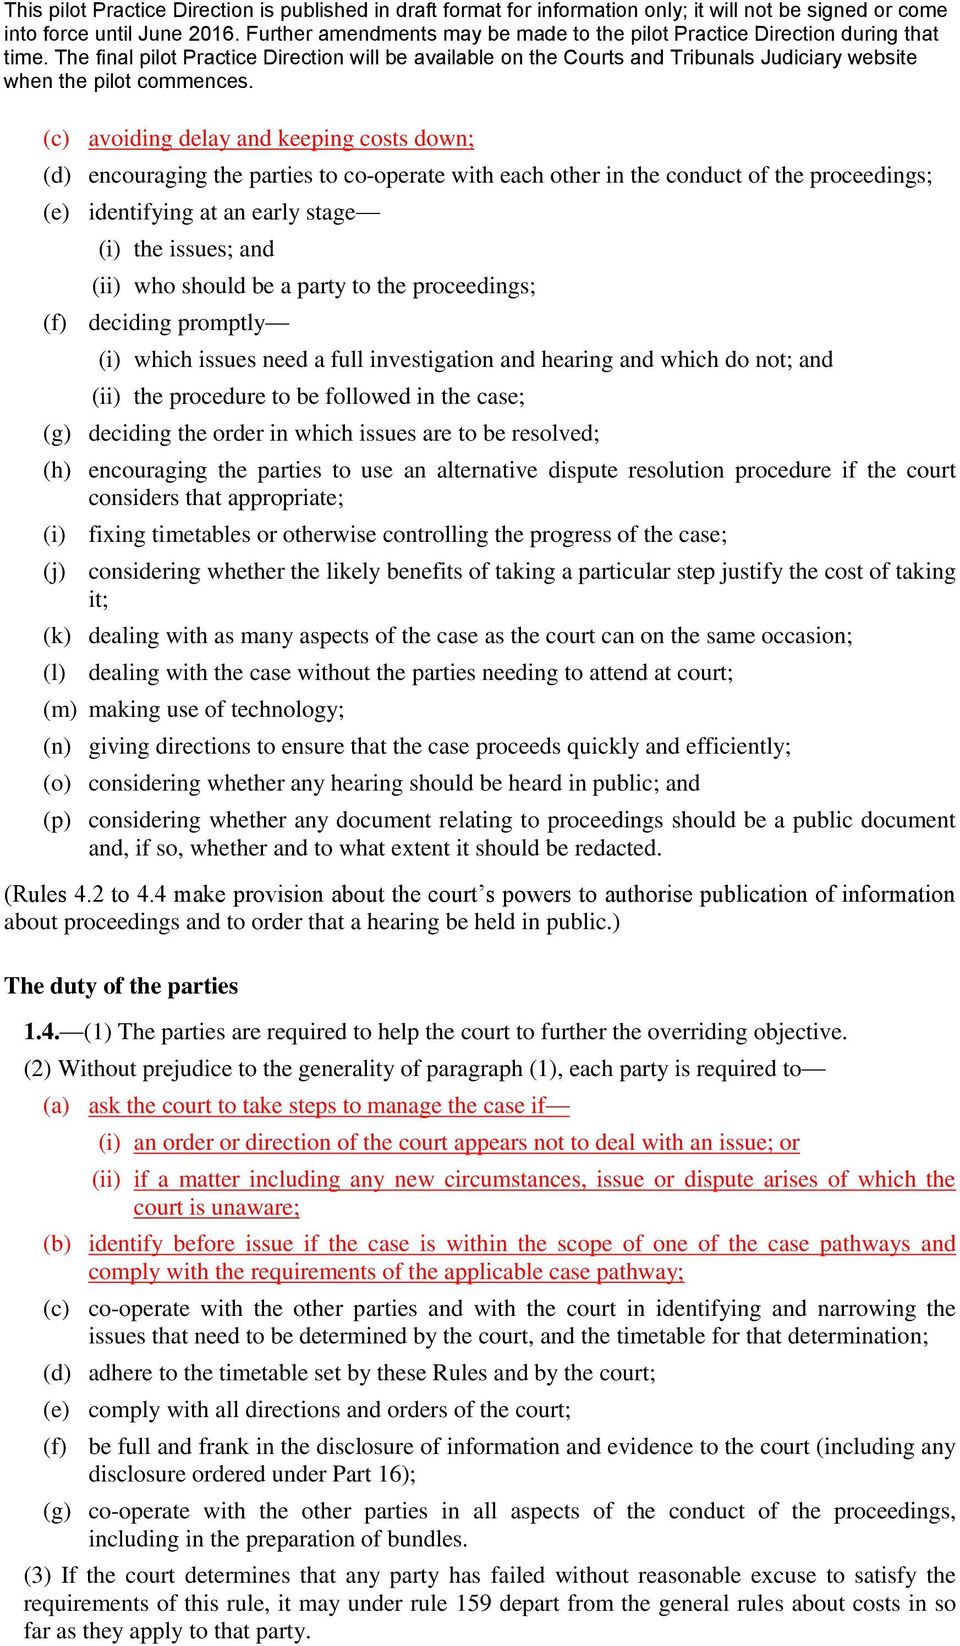 the order in which issues are to be resolved; (h) encouraging the parties to use an alternative dispute resolution procedure if the court considers that appropriate; (i) fixing timetables or